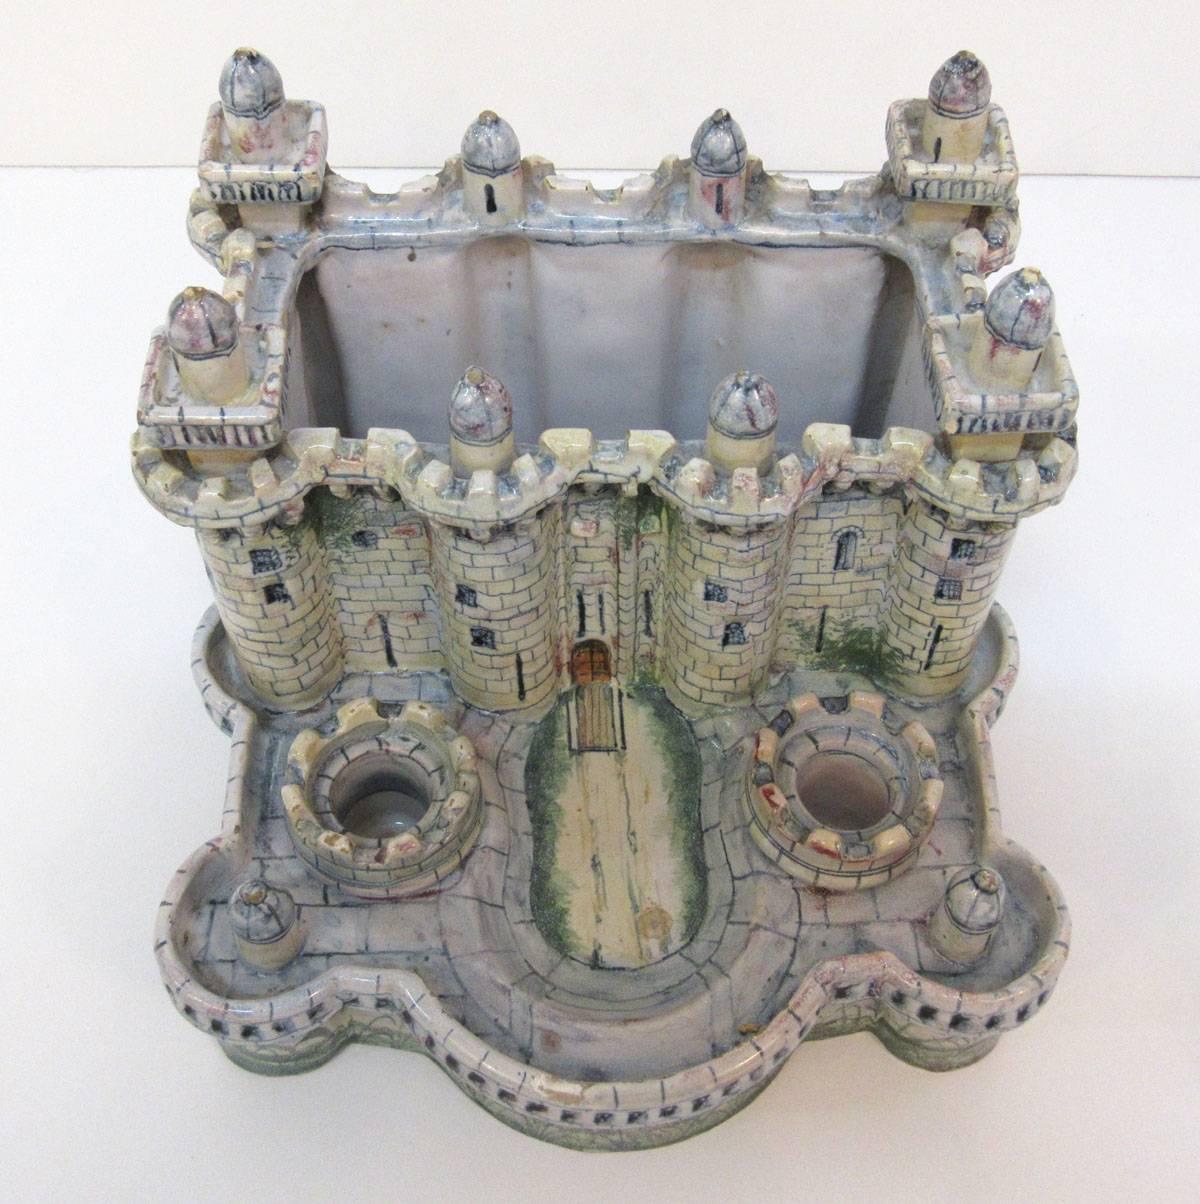 19th century Italian ink well and letter holder.